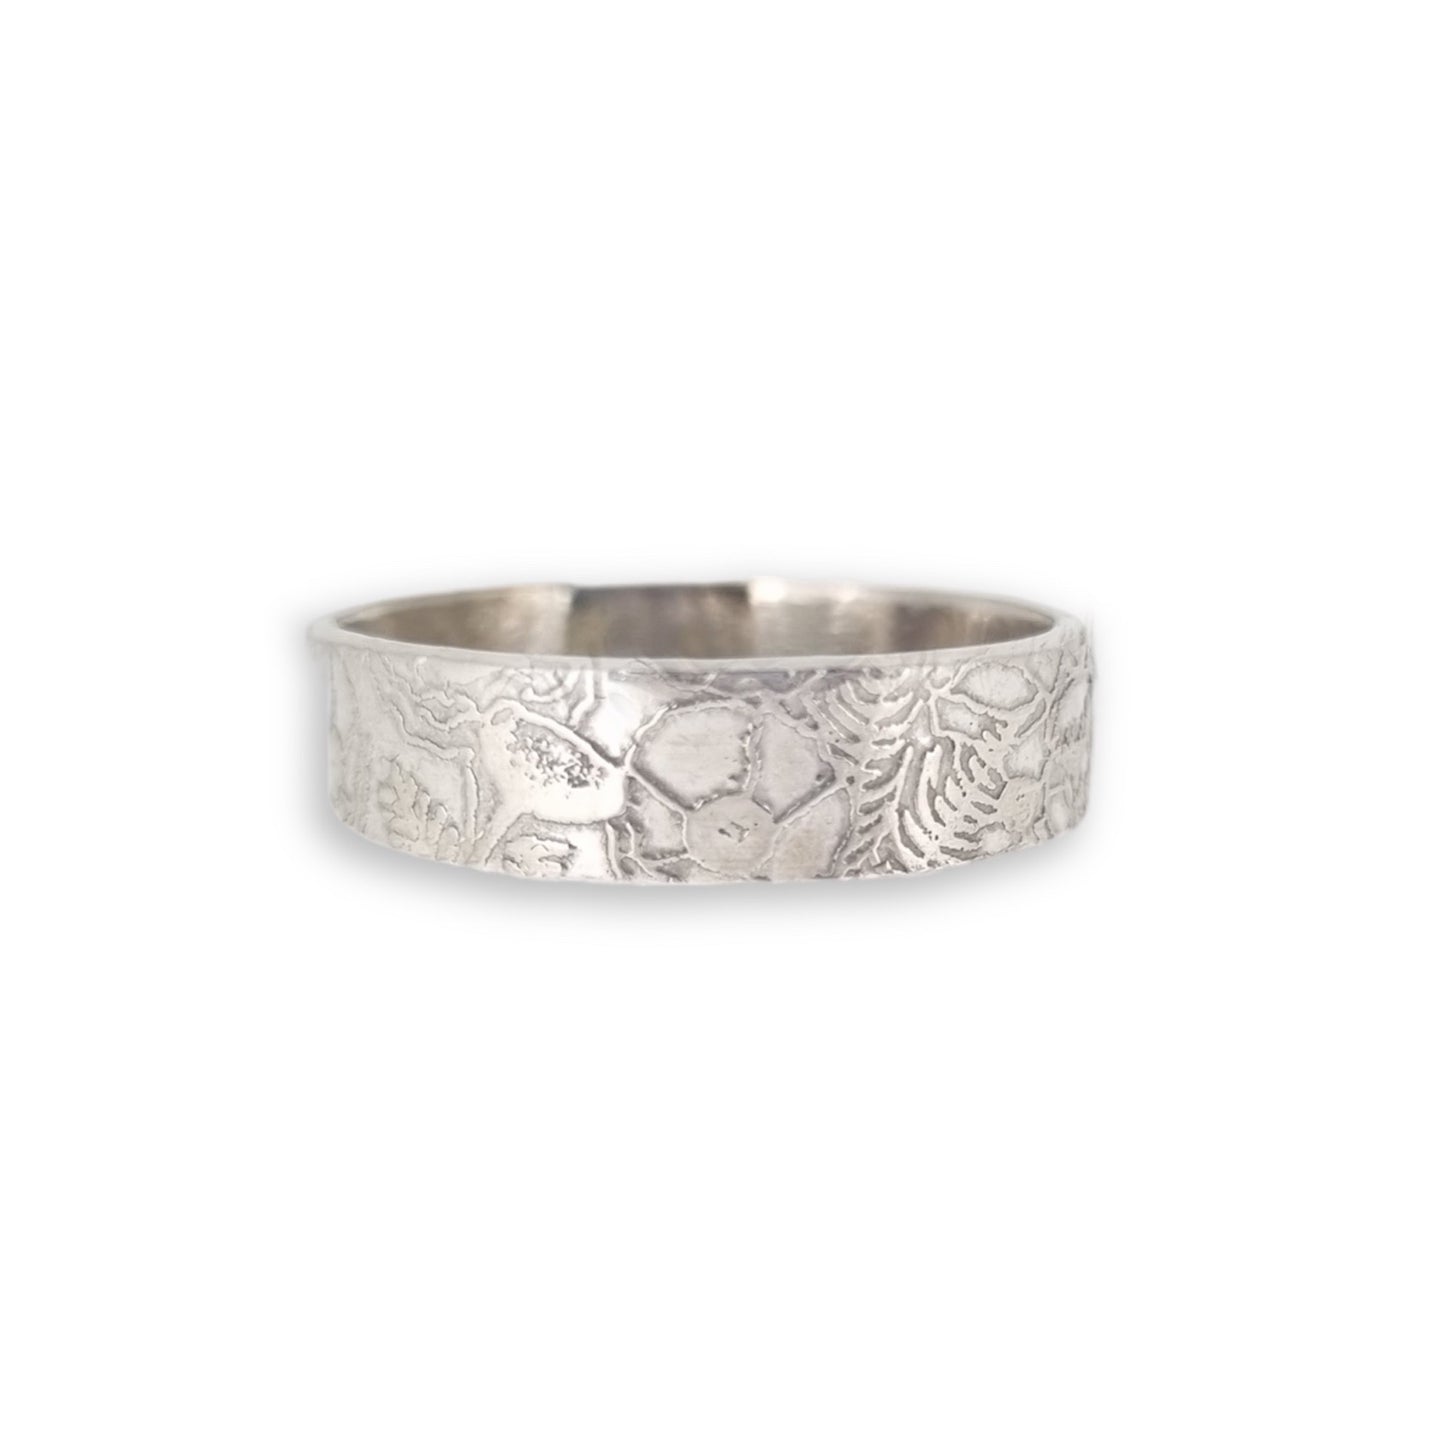 Wildflower meadow - etched pattern ring